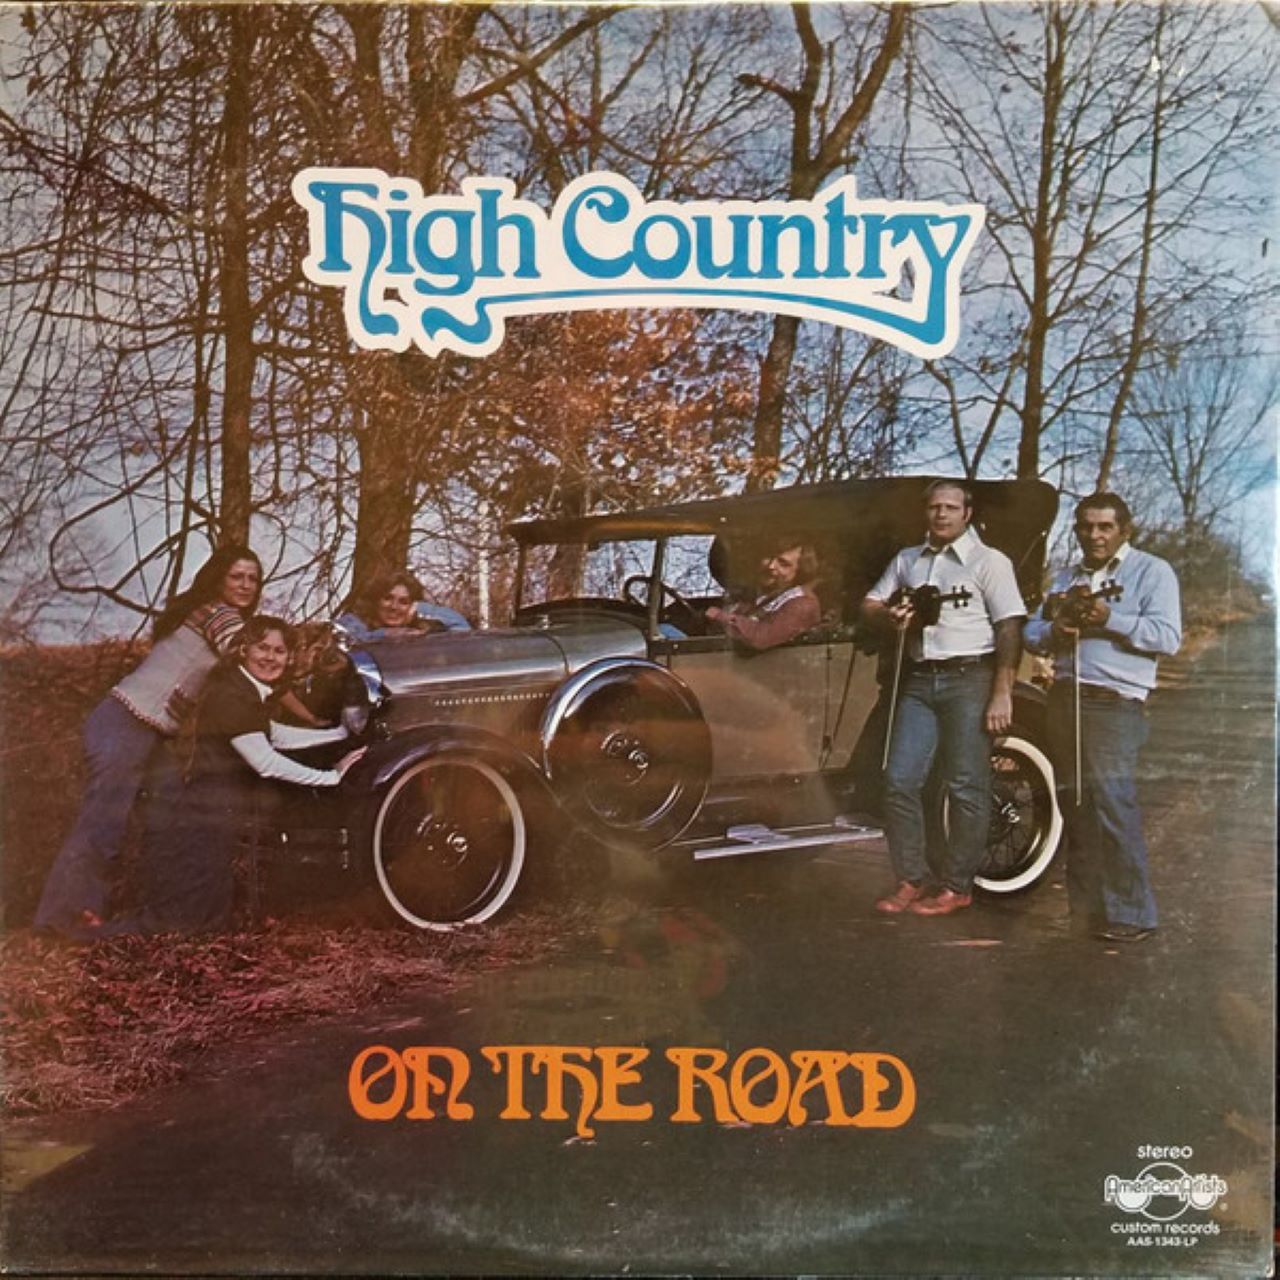 High Country - On The Road cover album